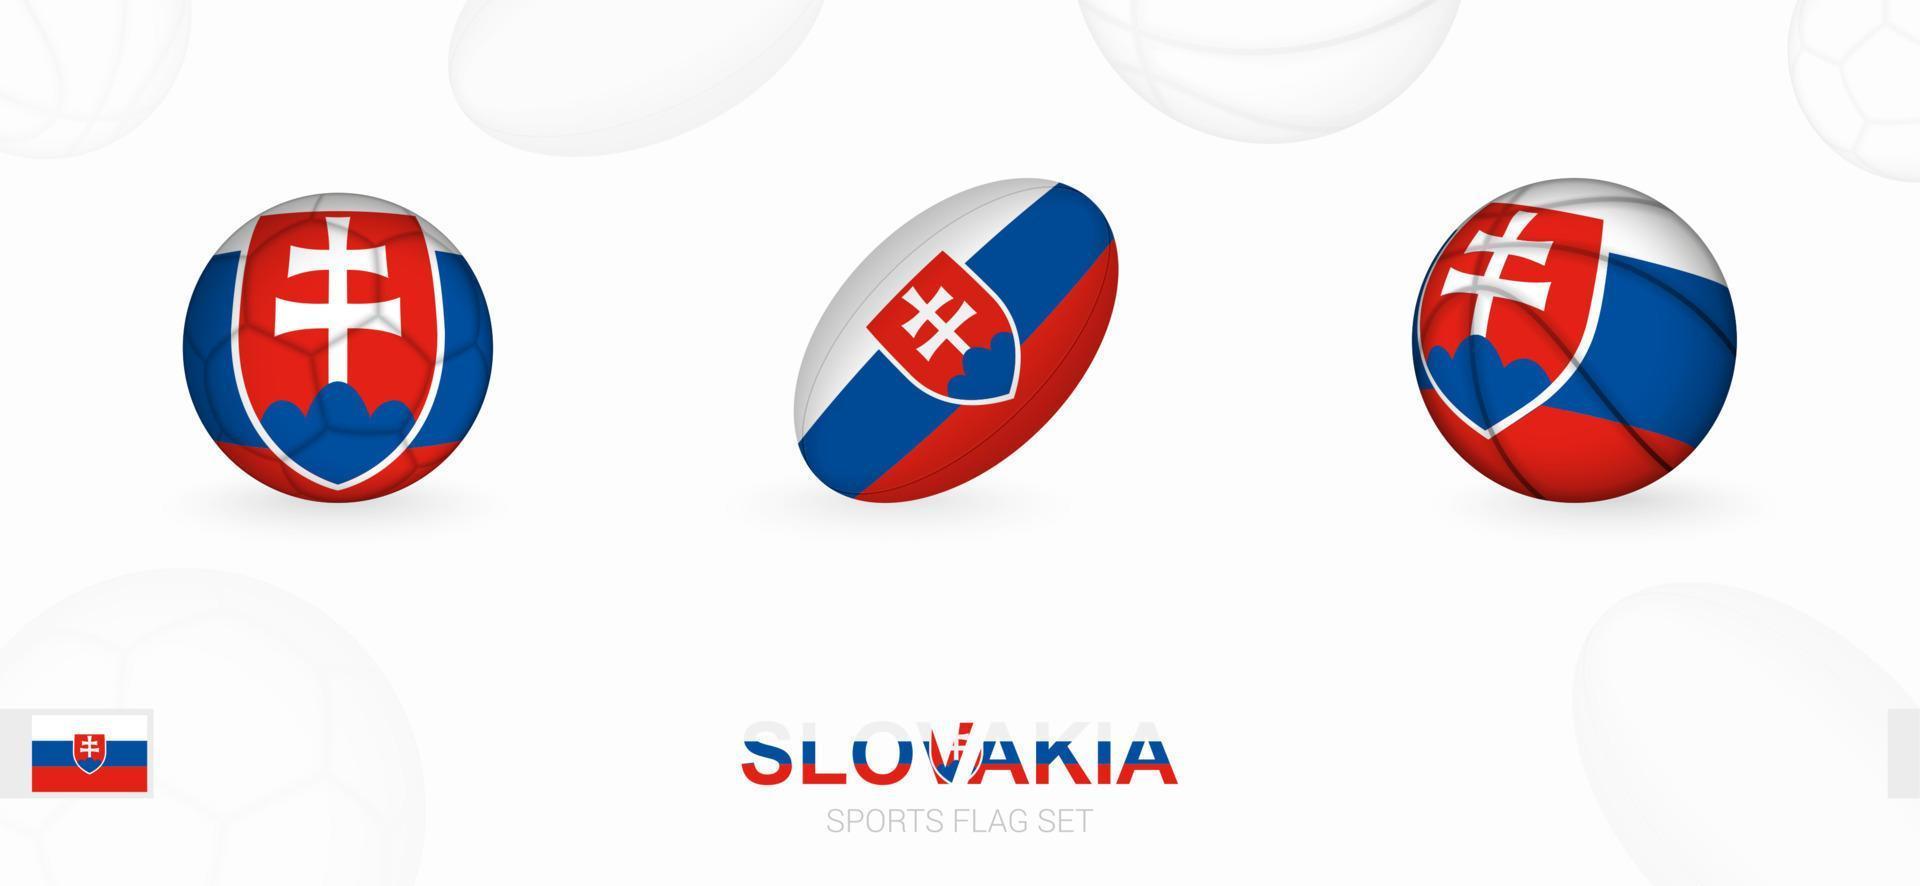 Sports icons for football, rugby and basketball with the flag of Slovakia. vector